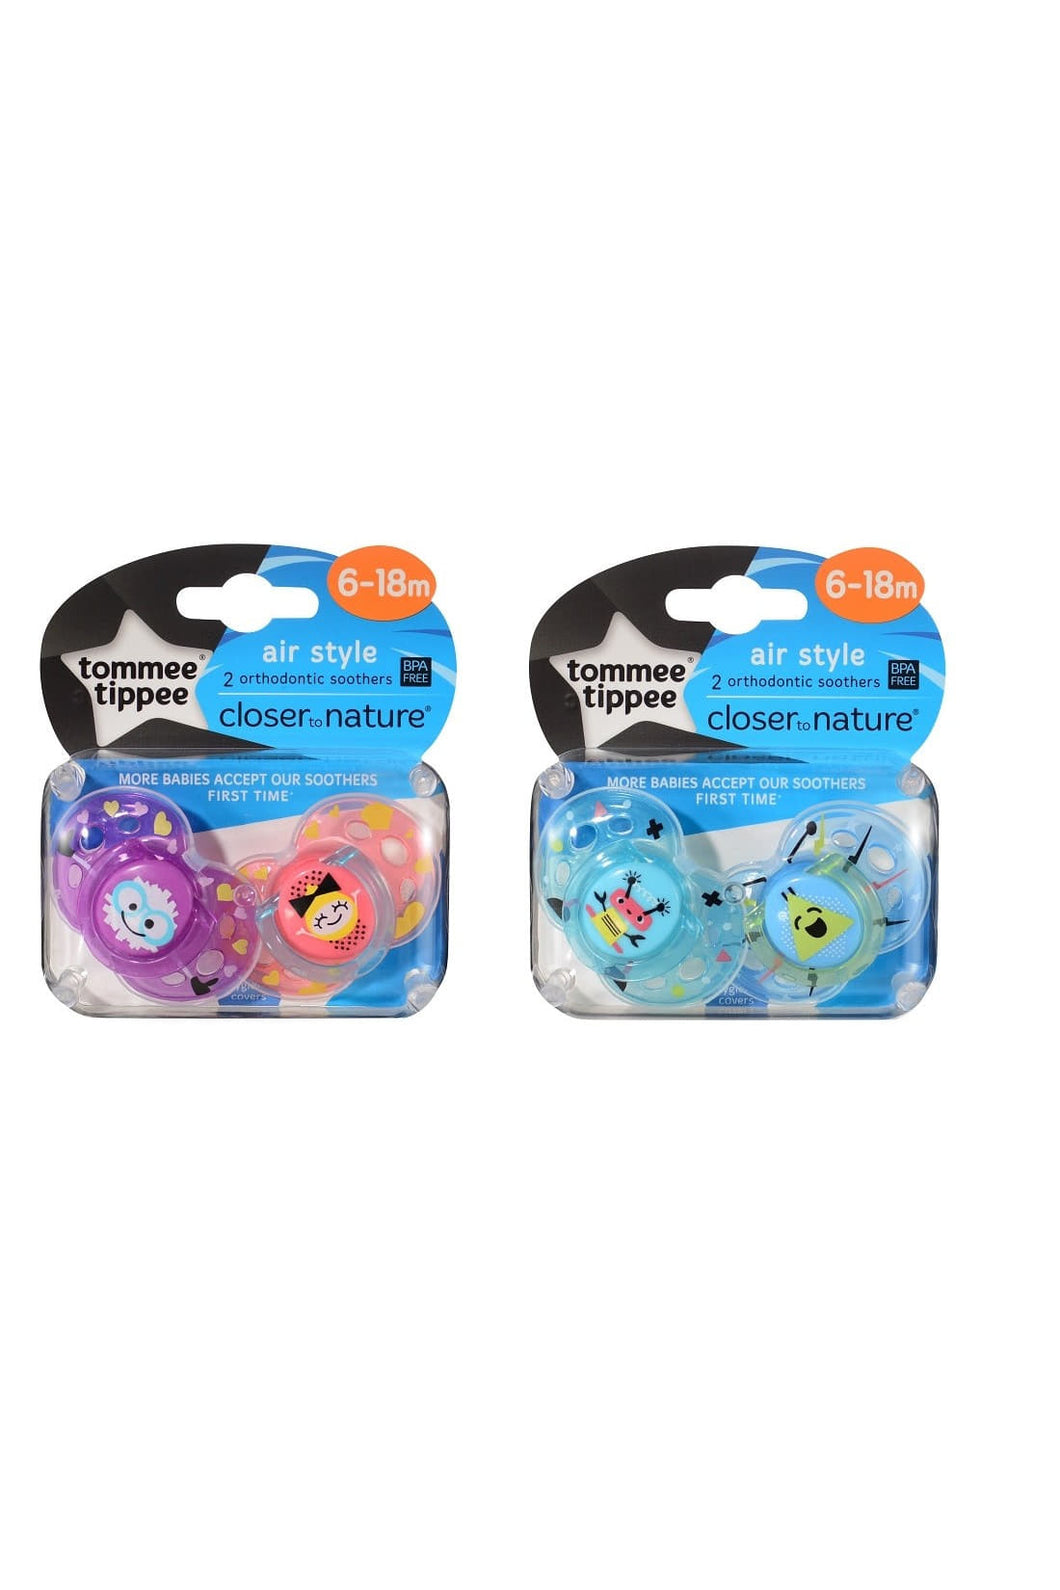 Tommee Tippee Closer To Nature Air Style Soothers 6 18M Twin Pack 1